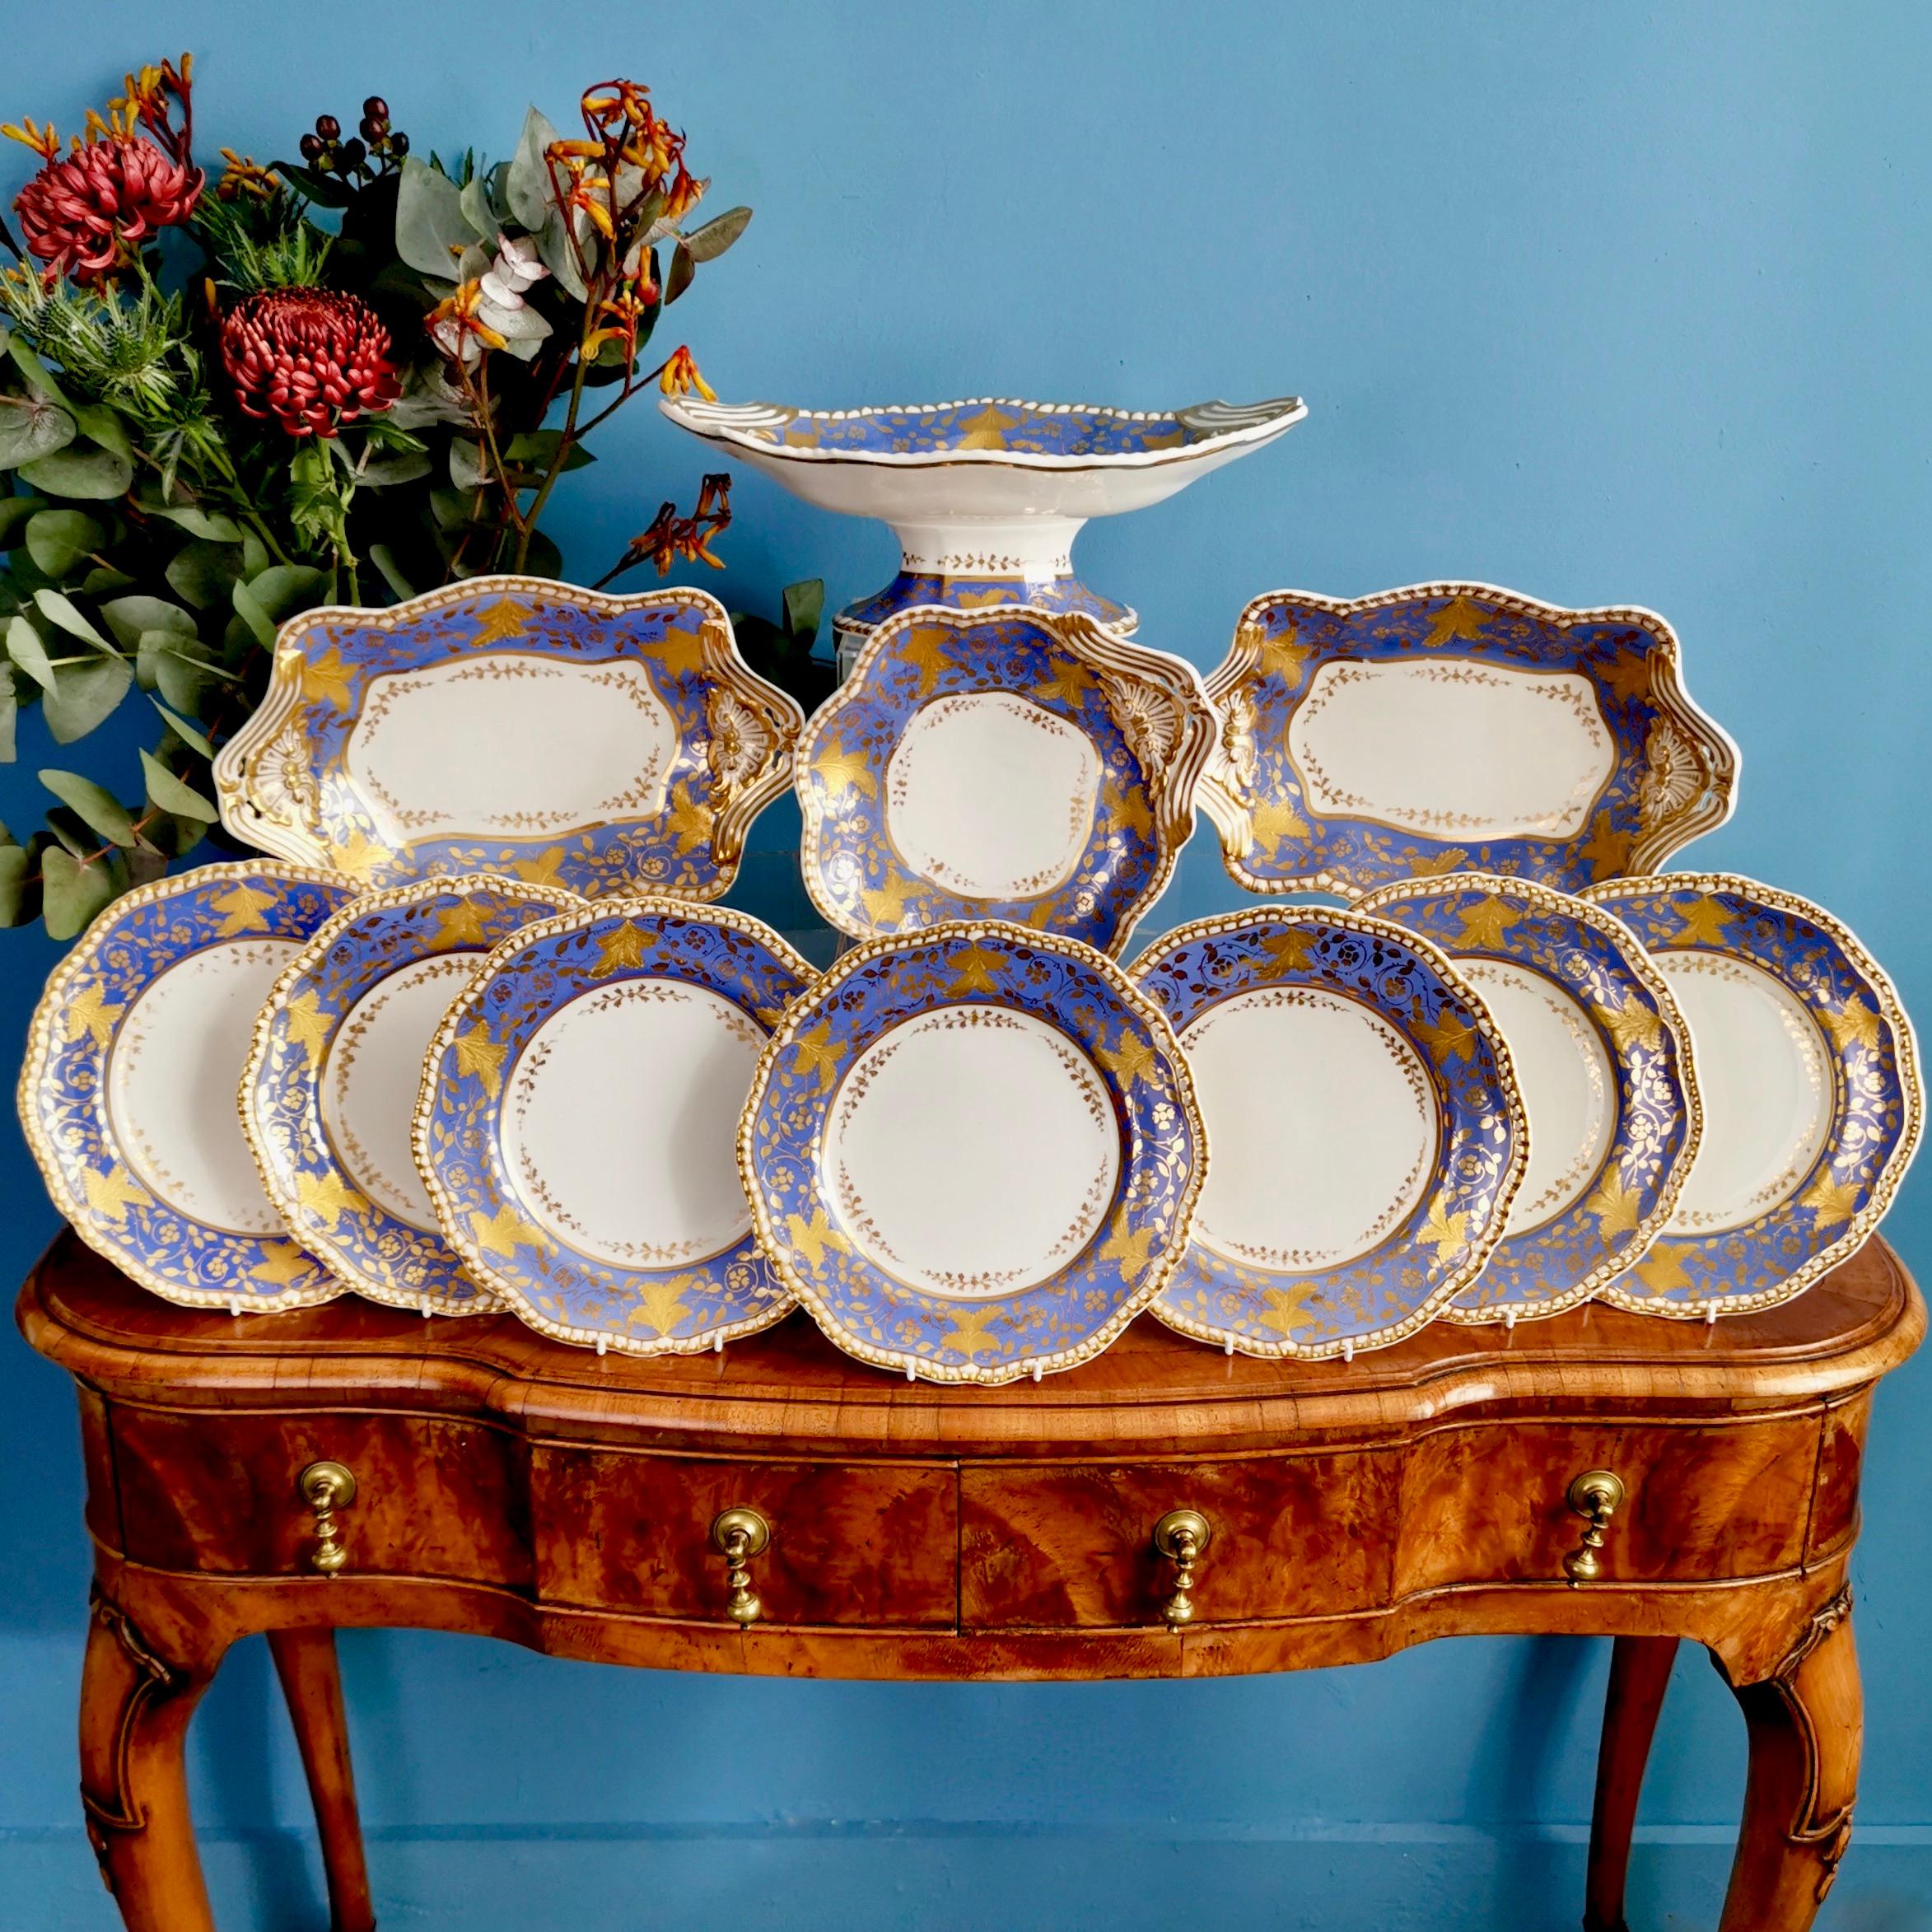 This is a stunning dessert service made by Spode in 1828, which was the Regency era. The service is made of Felspar porcelain and decorated in a beautiful periwinkle purple colour with a raised gilt vine pattern. The service consists of a large